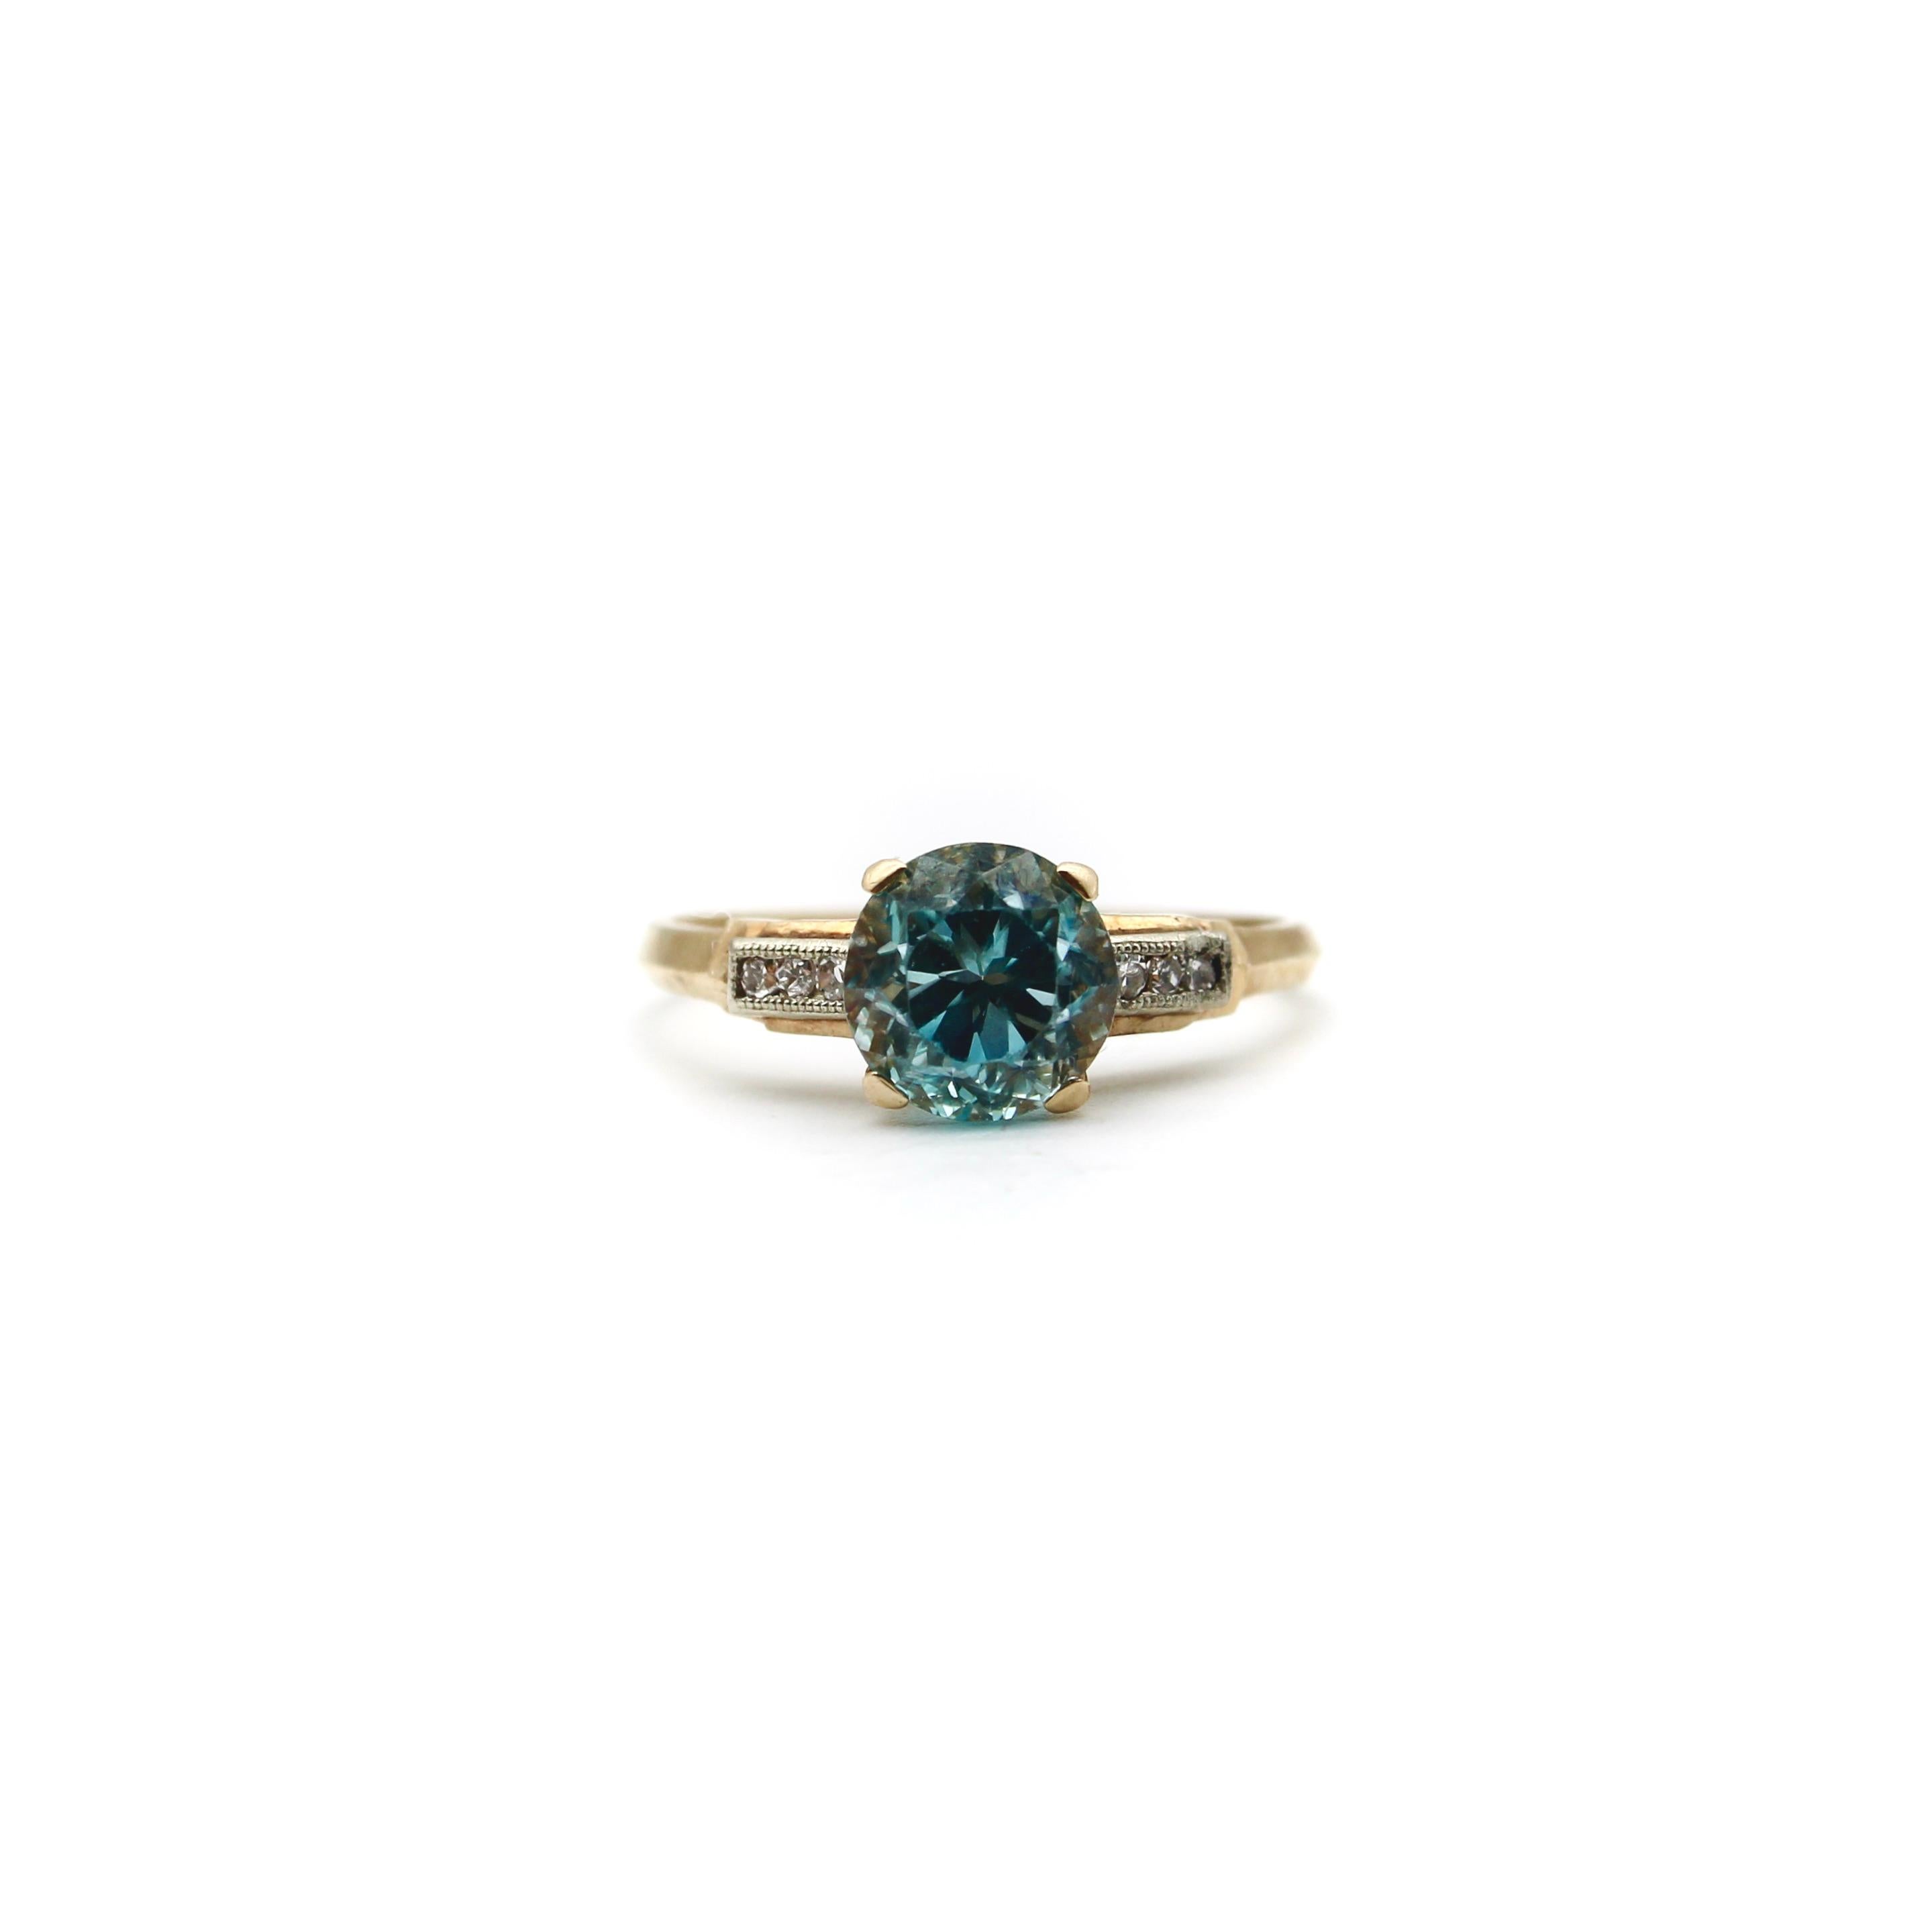 Circa the 1920’s, this 14k gold ring features a Mediterranean blue zircon, set between rows of single cut diamonds. The zircon is an Old European Cut, with high facets that are very reflective of the light and have a mesmerizing shimmer. Zircon is